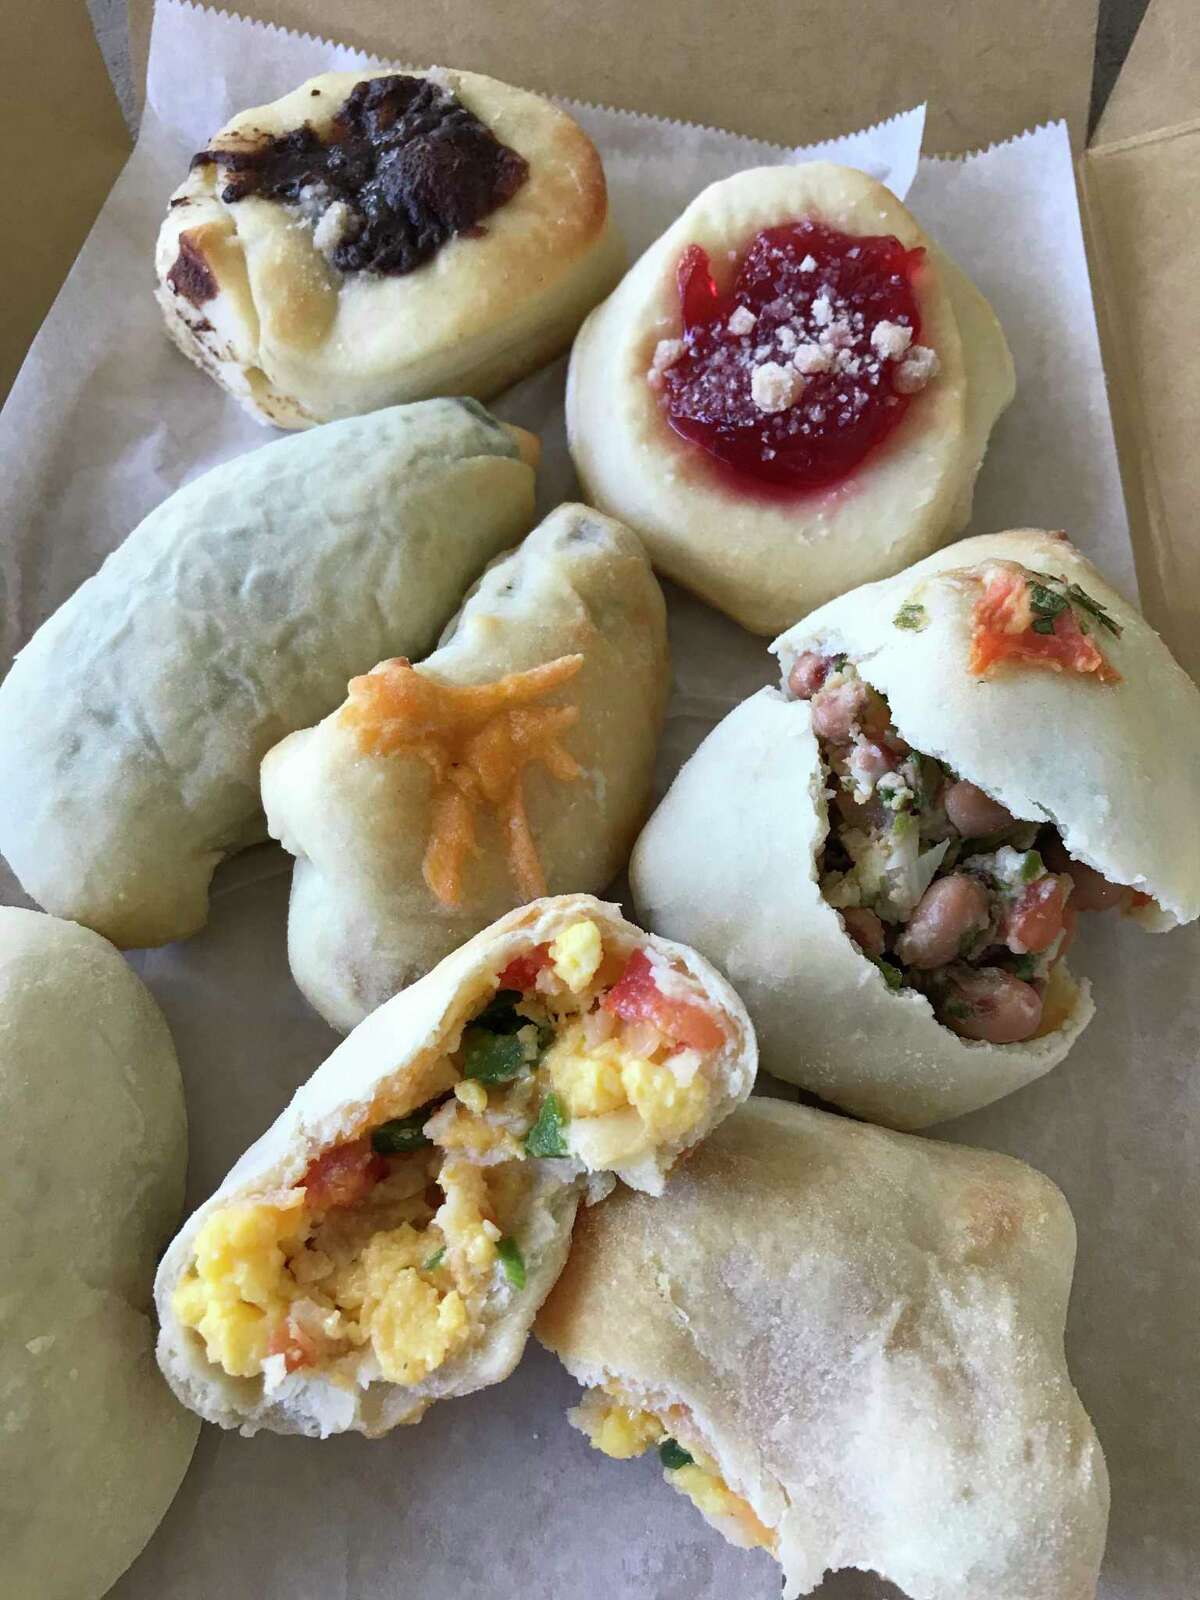 A selection of pastries from Bexar Kolaches